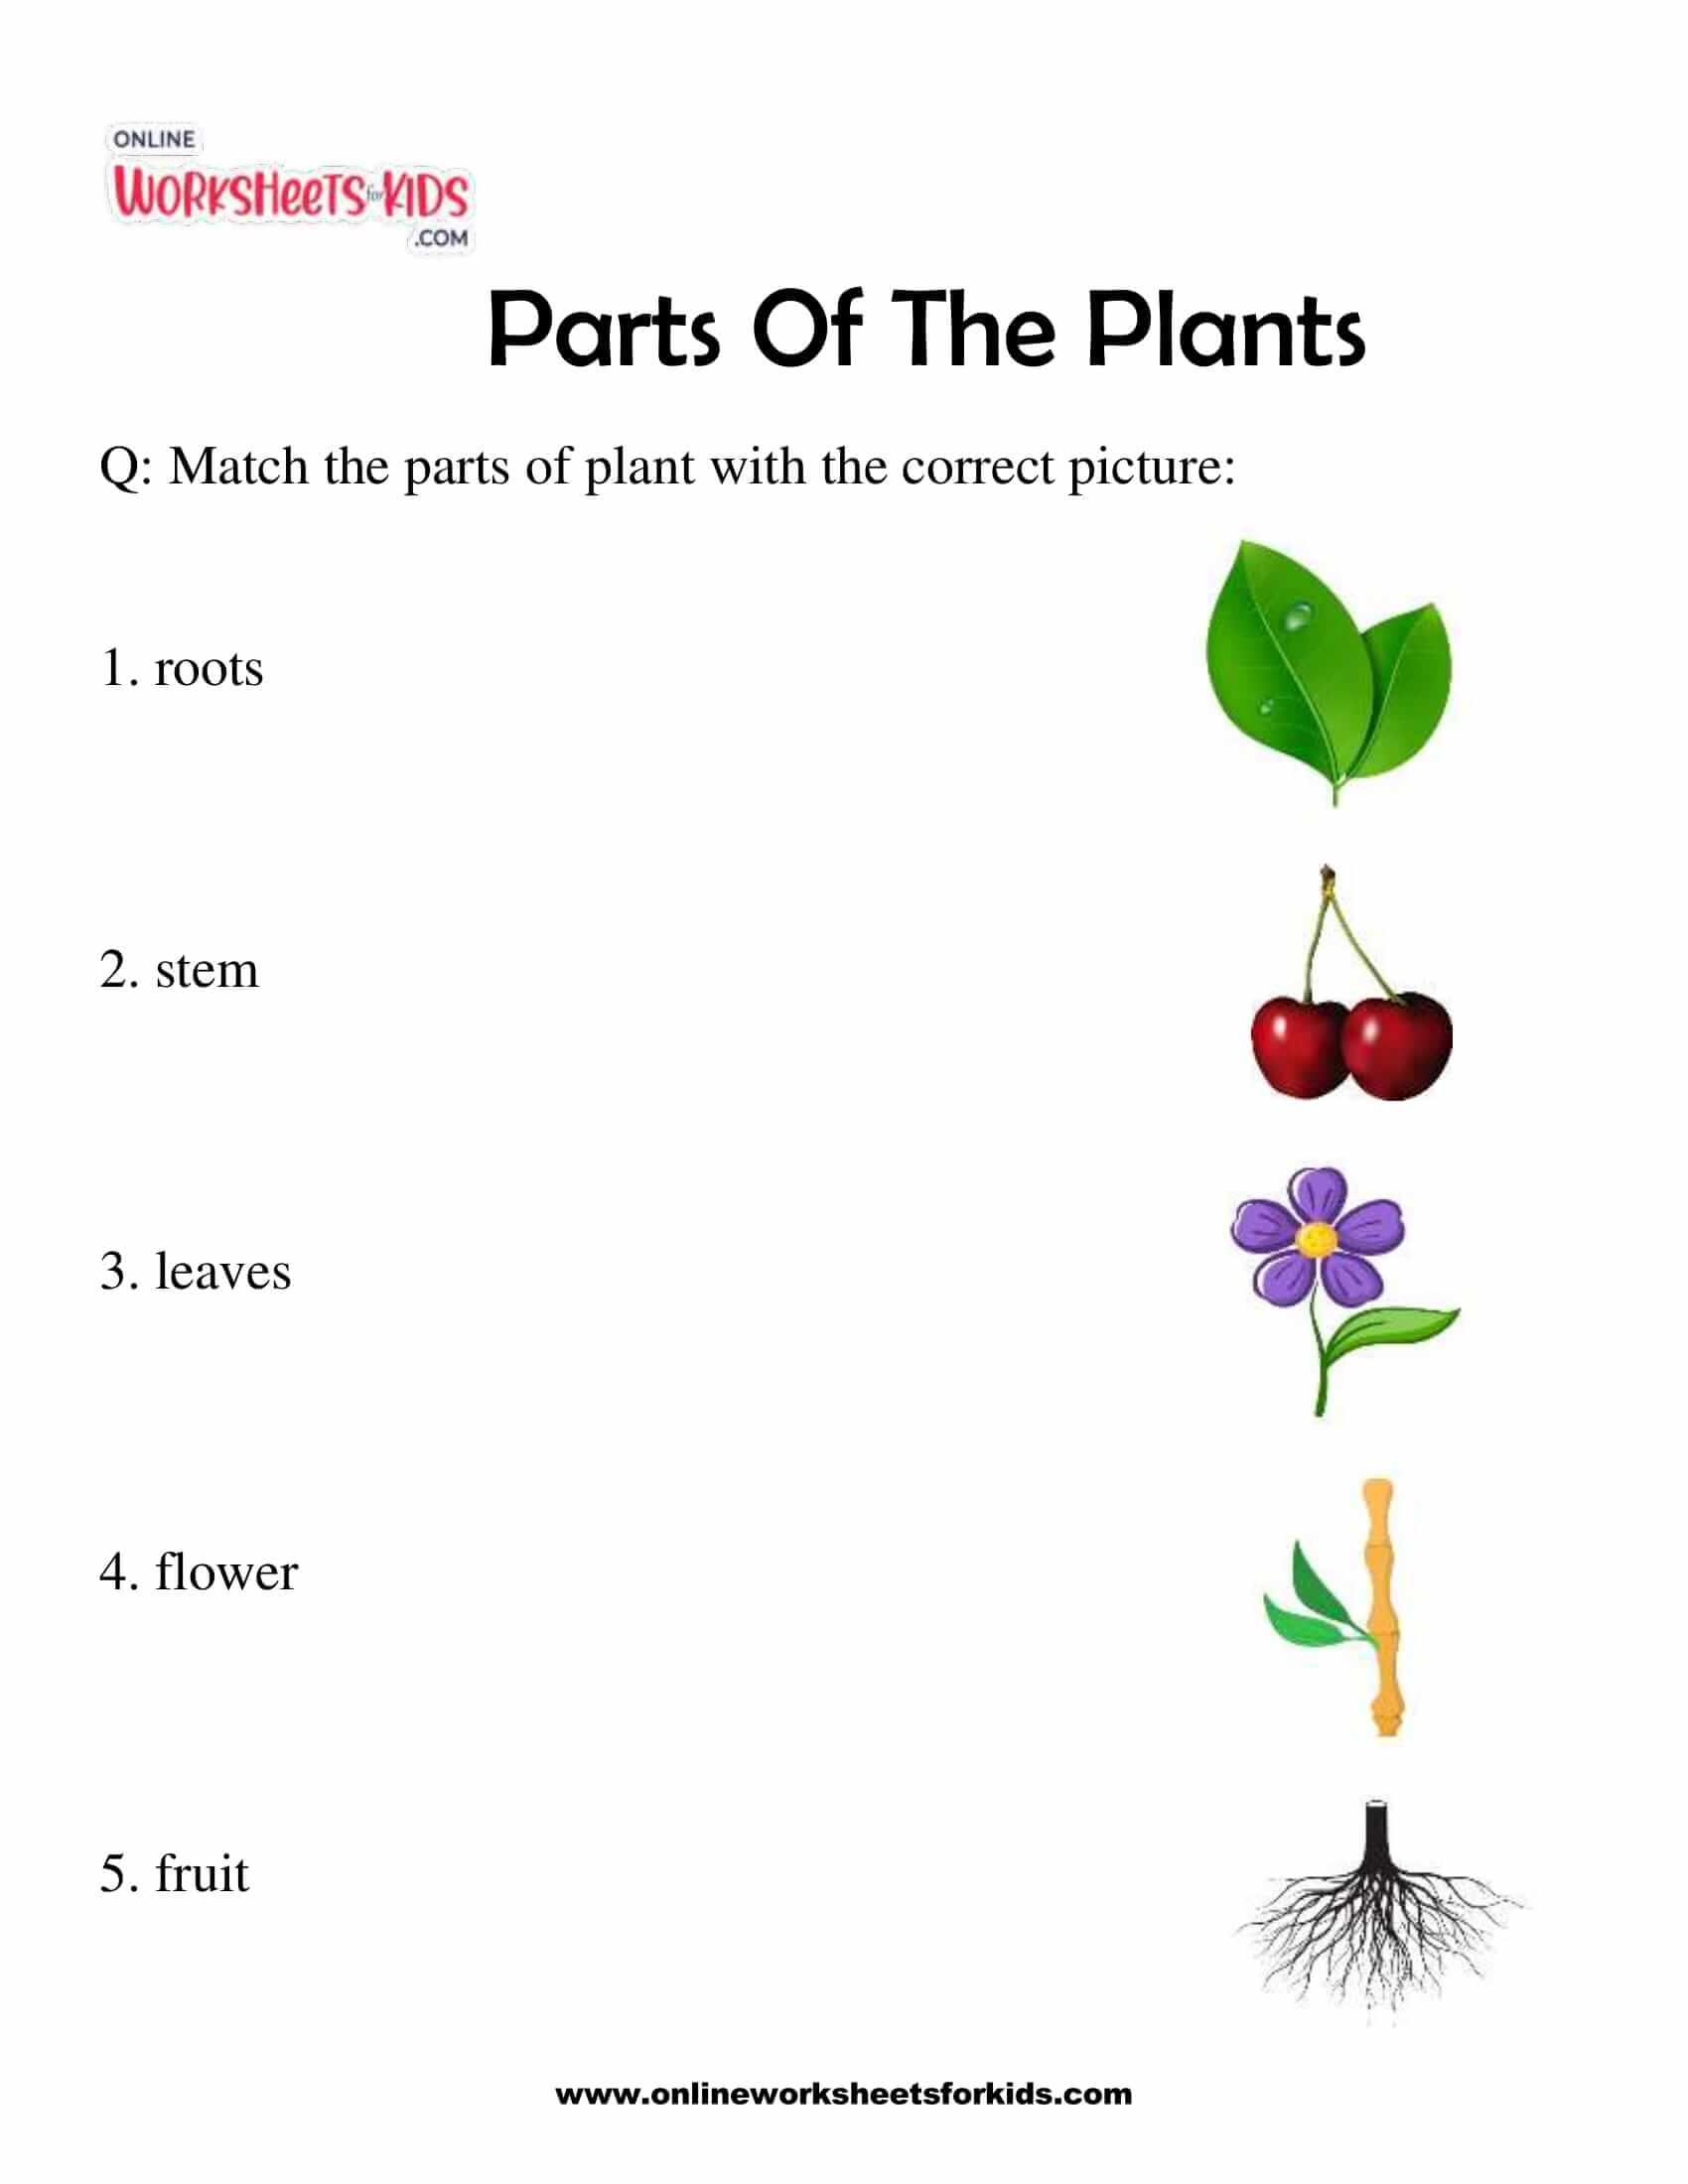 Parts Of The Plants 5